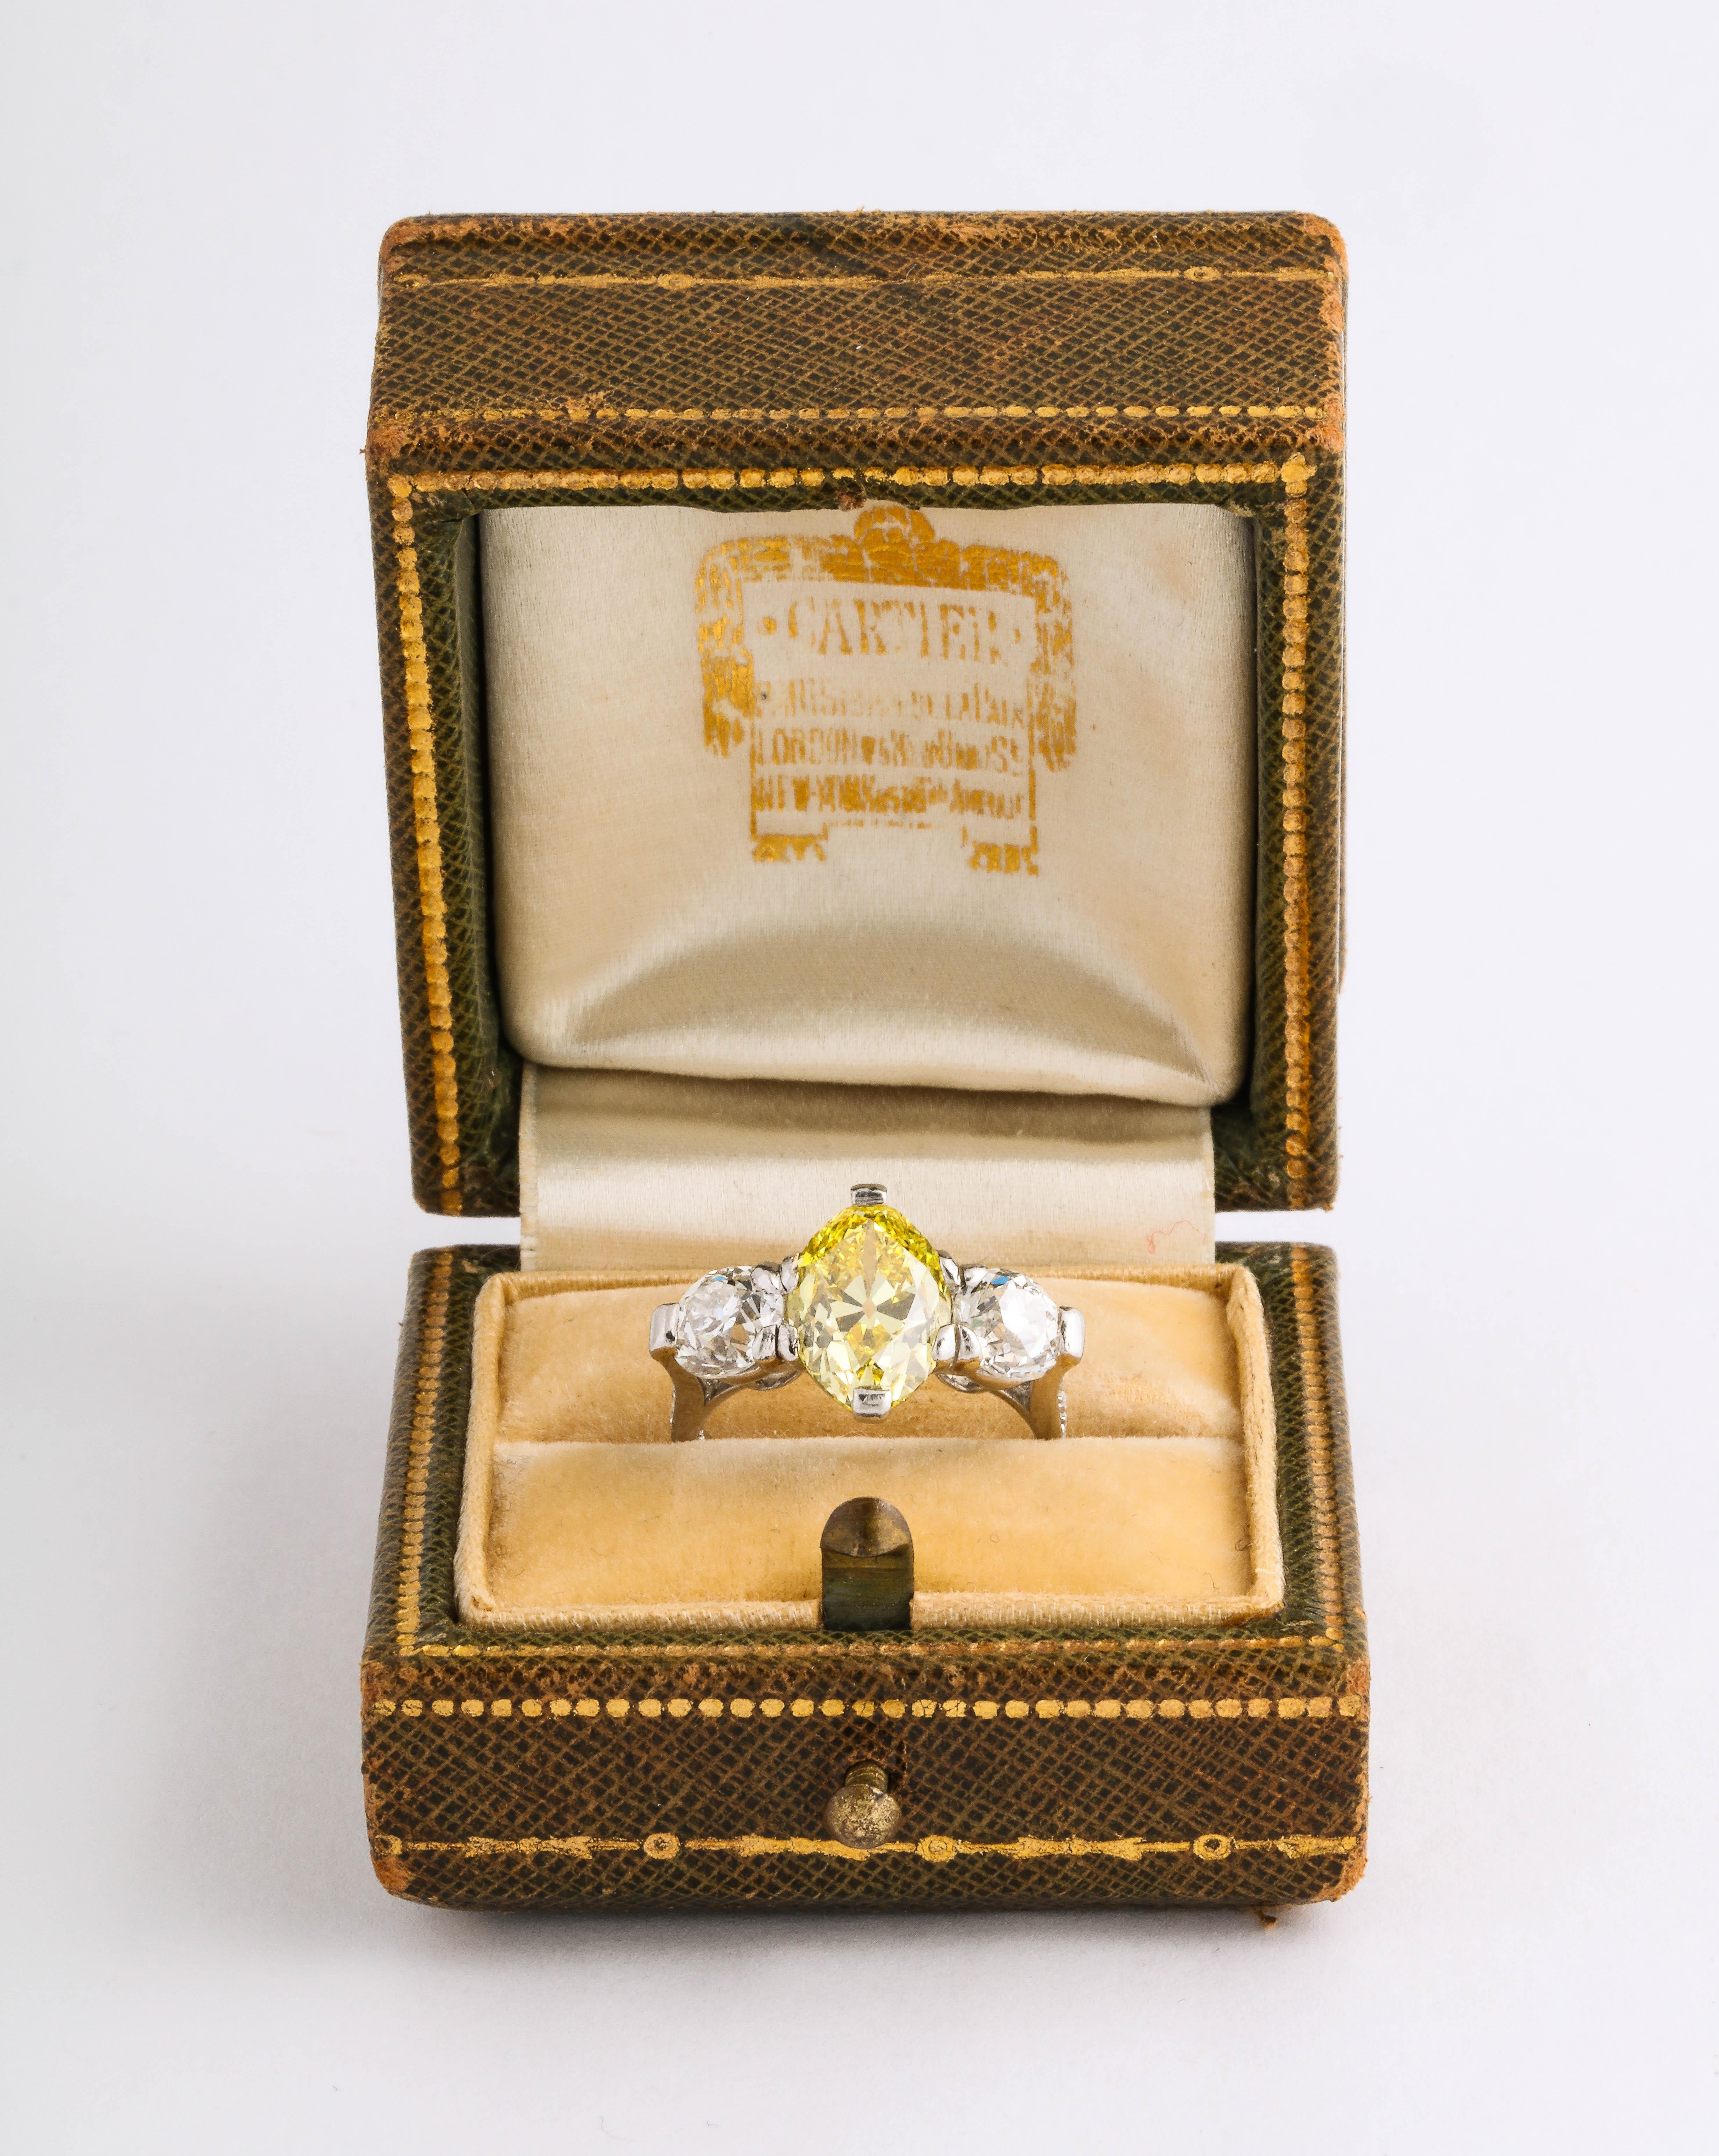 Cartier Edwardian Yellow and White Diamond Platinum Ring 

Materials:
Platinum 3.5 dwt

Stones:
Natural Fancy Vivid Yellow Diamonds VVS2
Marquise GIA report # 2195639958
2 old mine cut VVS1 E Color @ 1.70 cts tw

23 / 8837 no marked on inside of